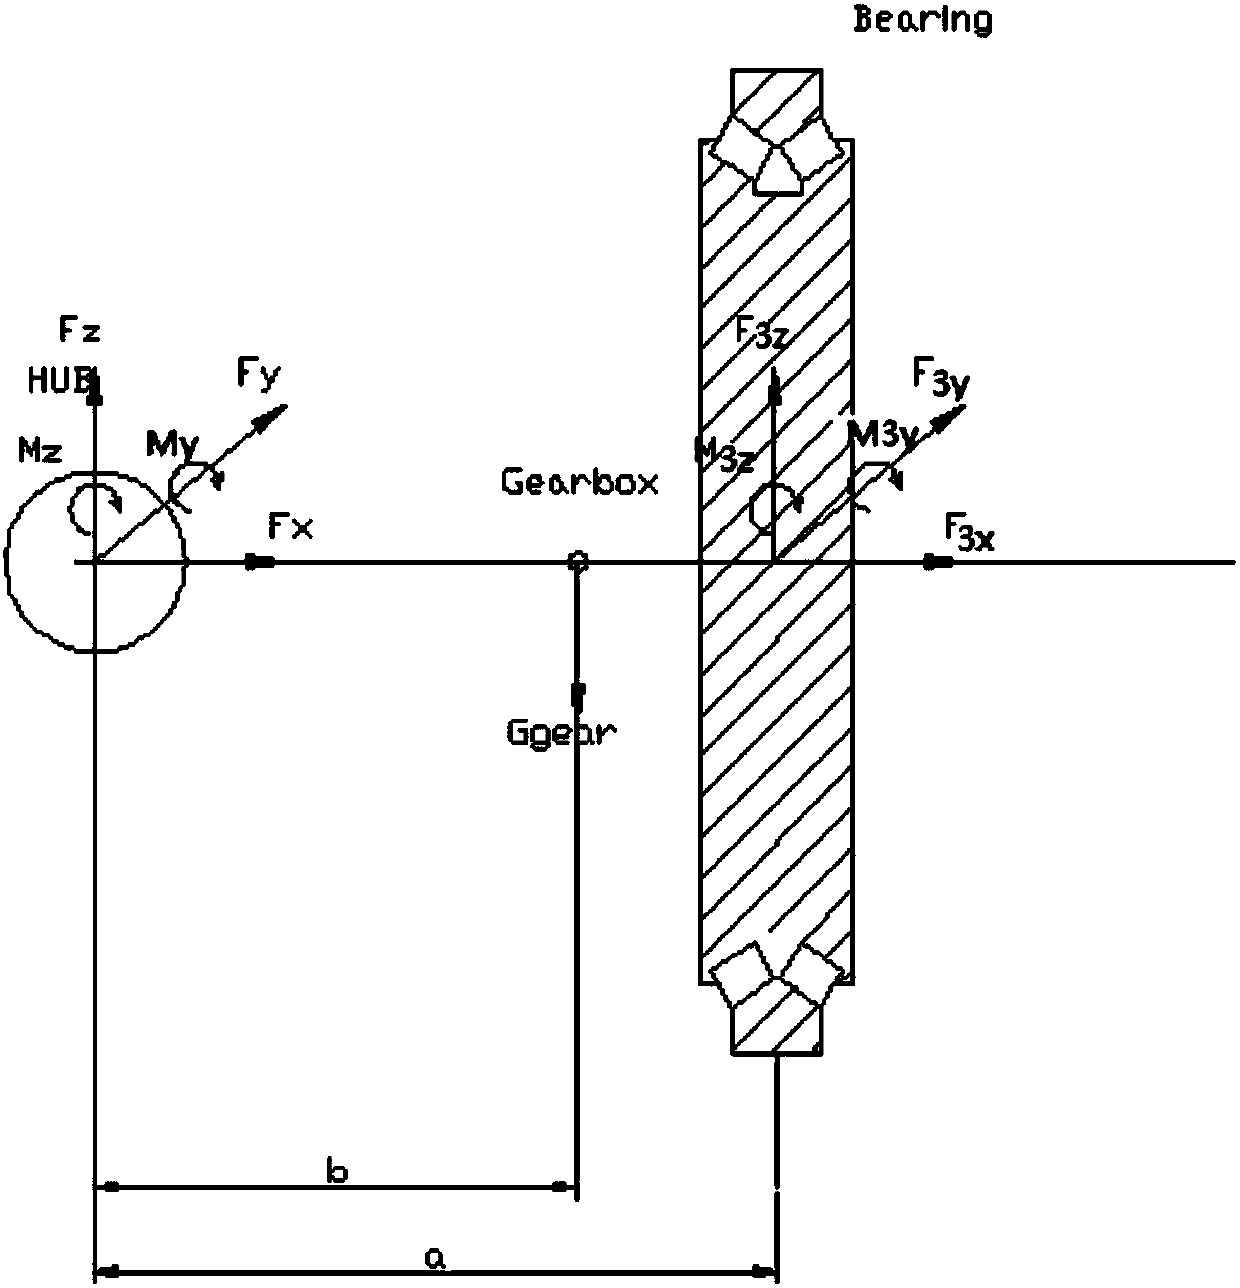 Checking tool for bearing raceways of main shafts